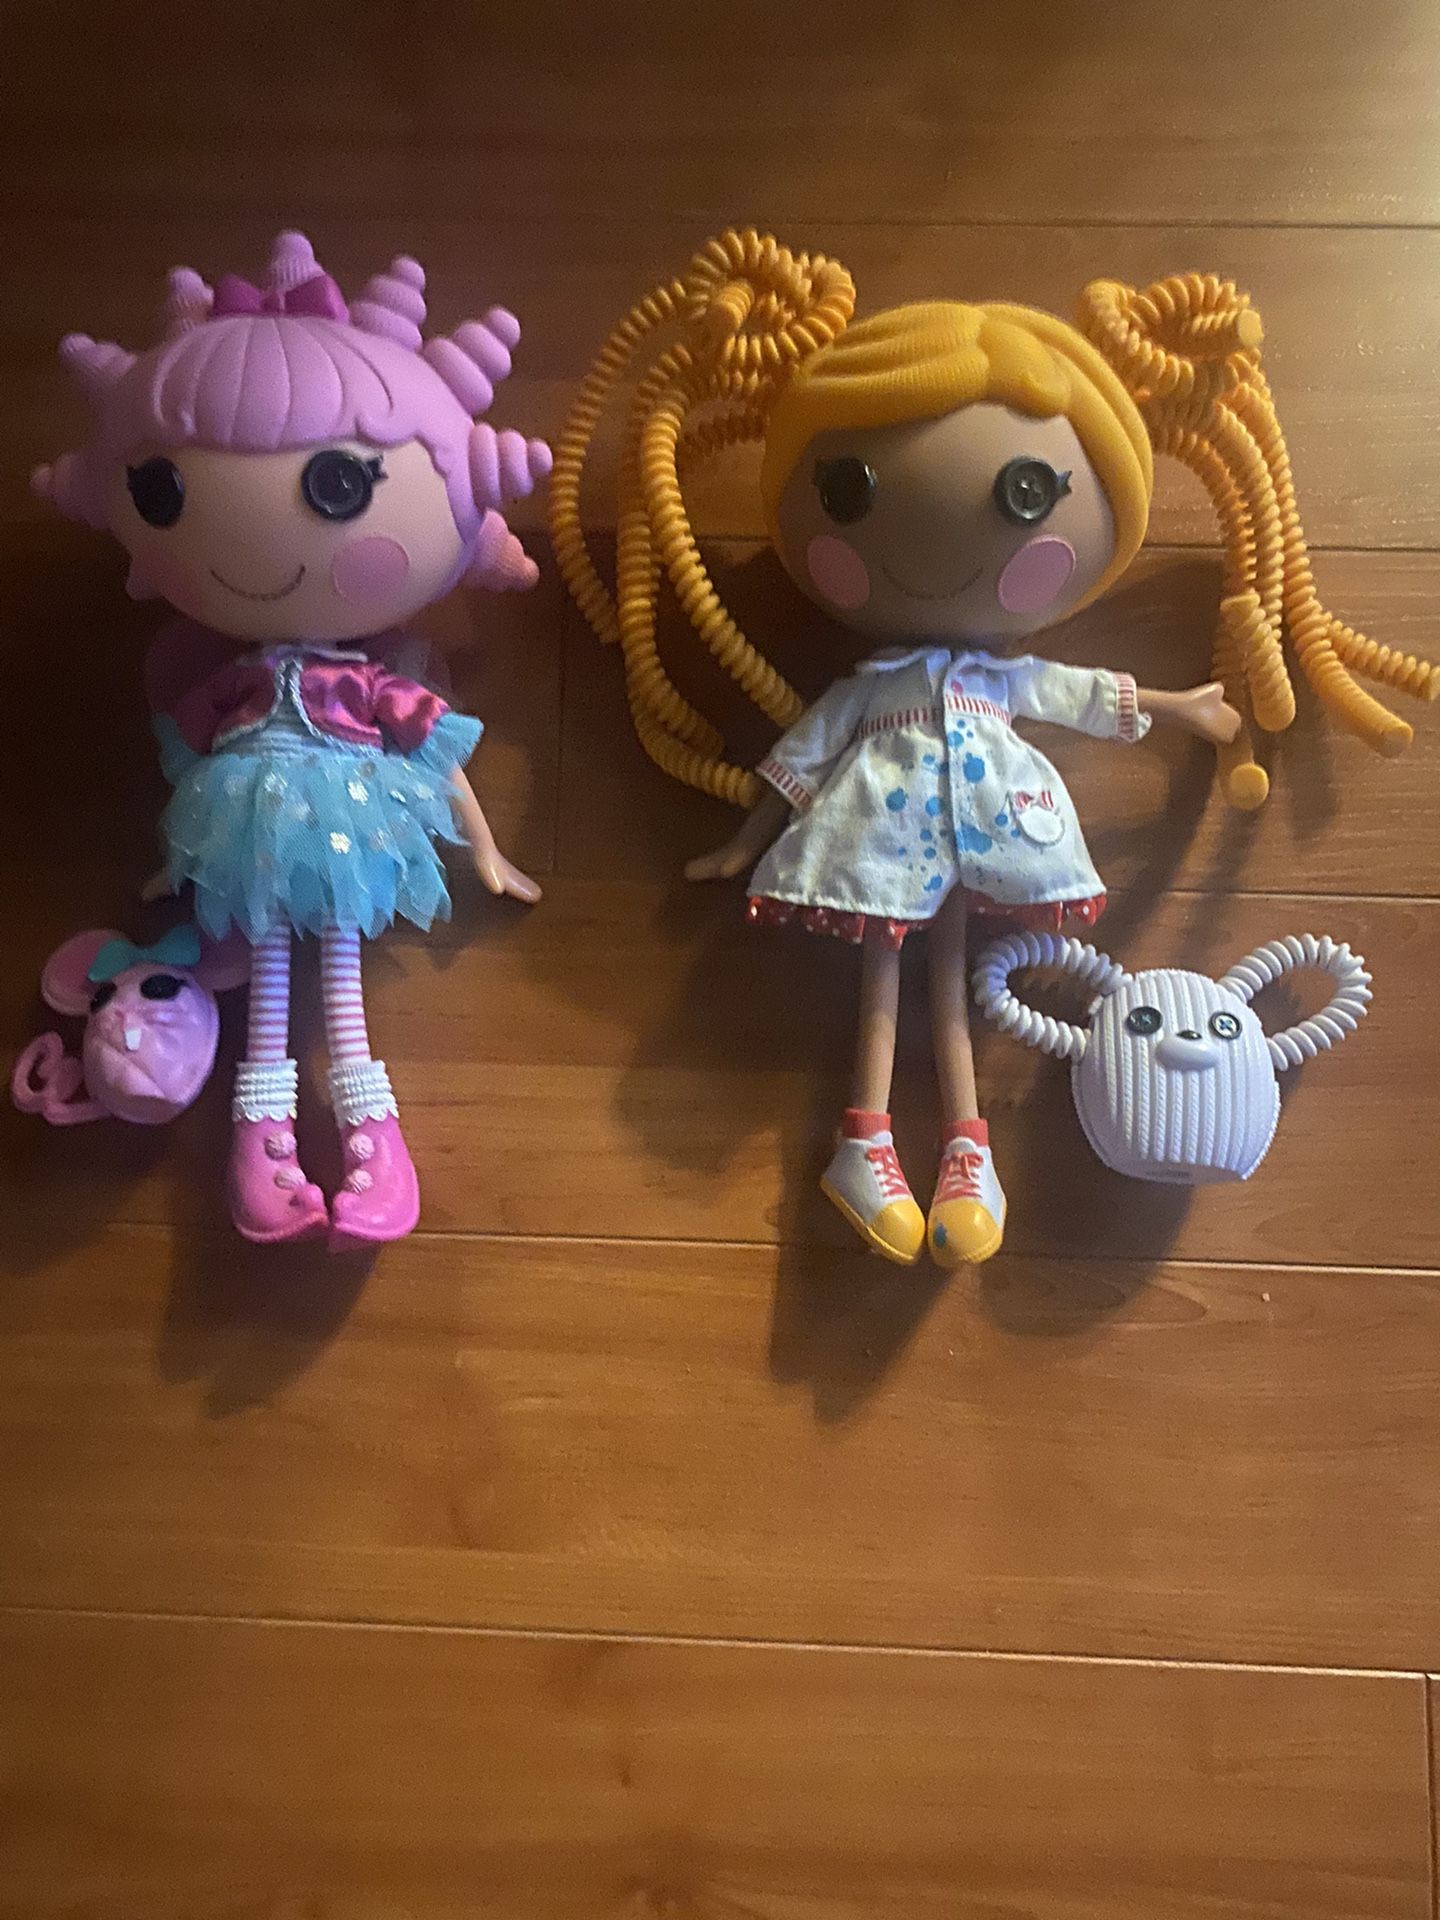  Pair of large Lalaloopsy dolls with their pet in excellent condition